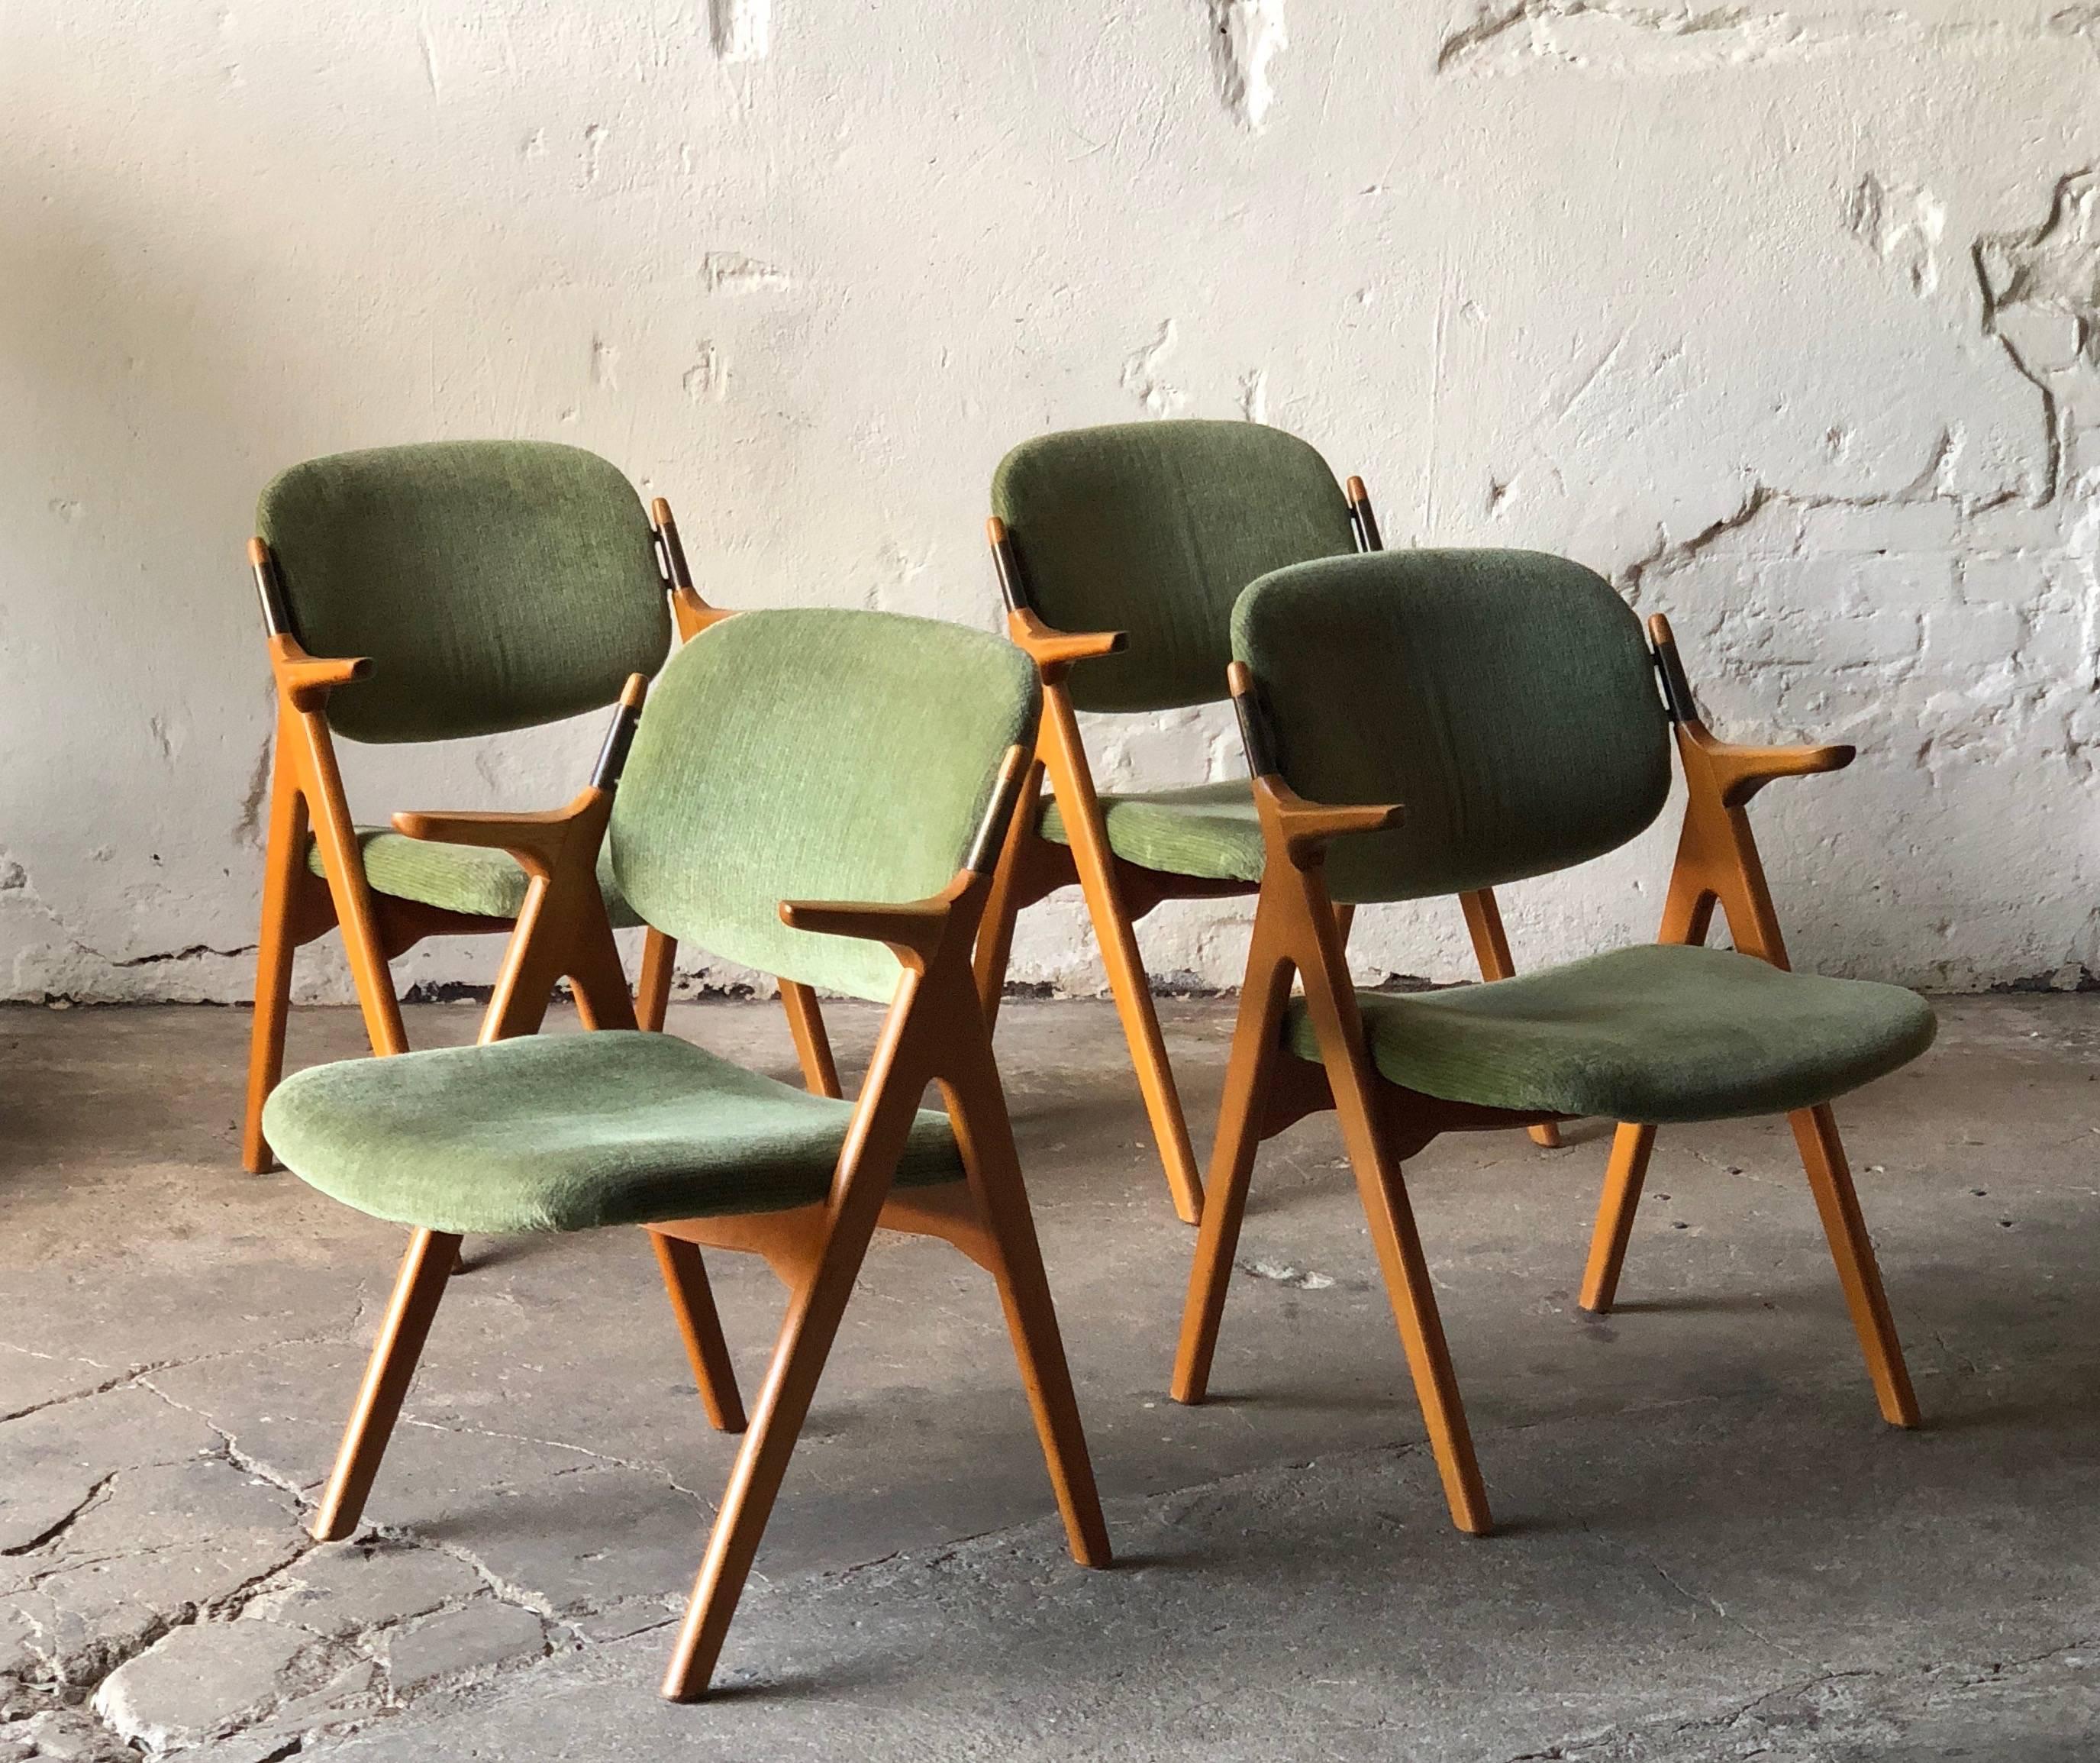 Scandinavian Modern Armchairs in Birch with Original Upholstery 1950s Vintage For Sale 2